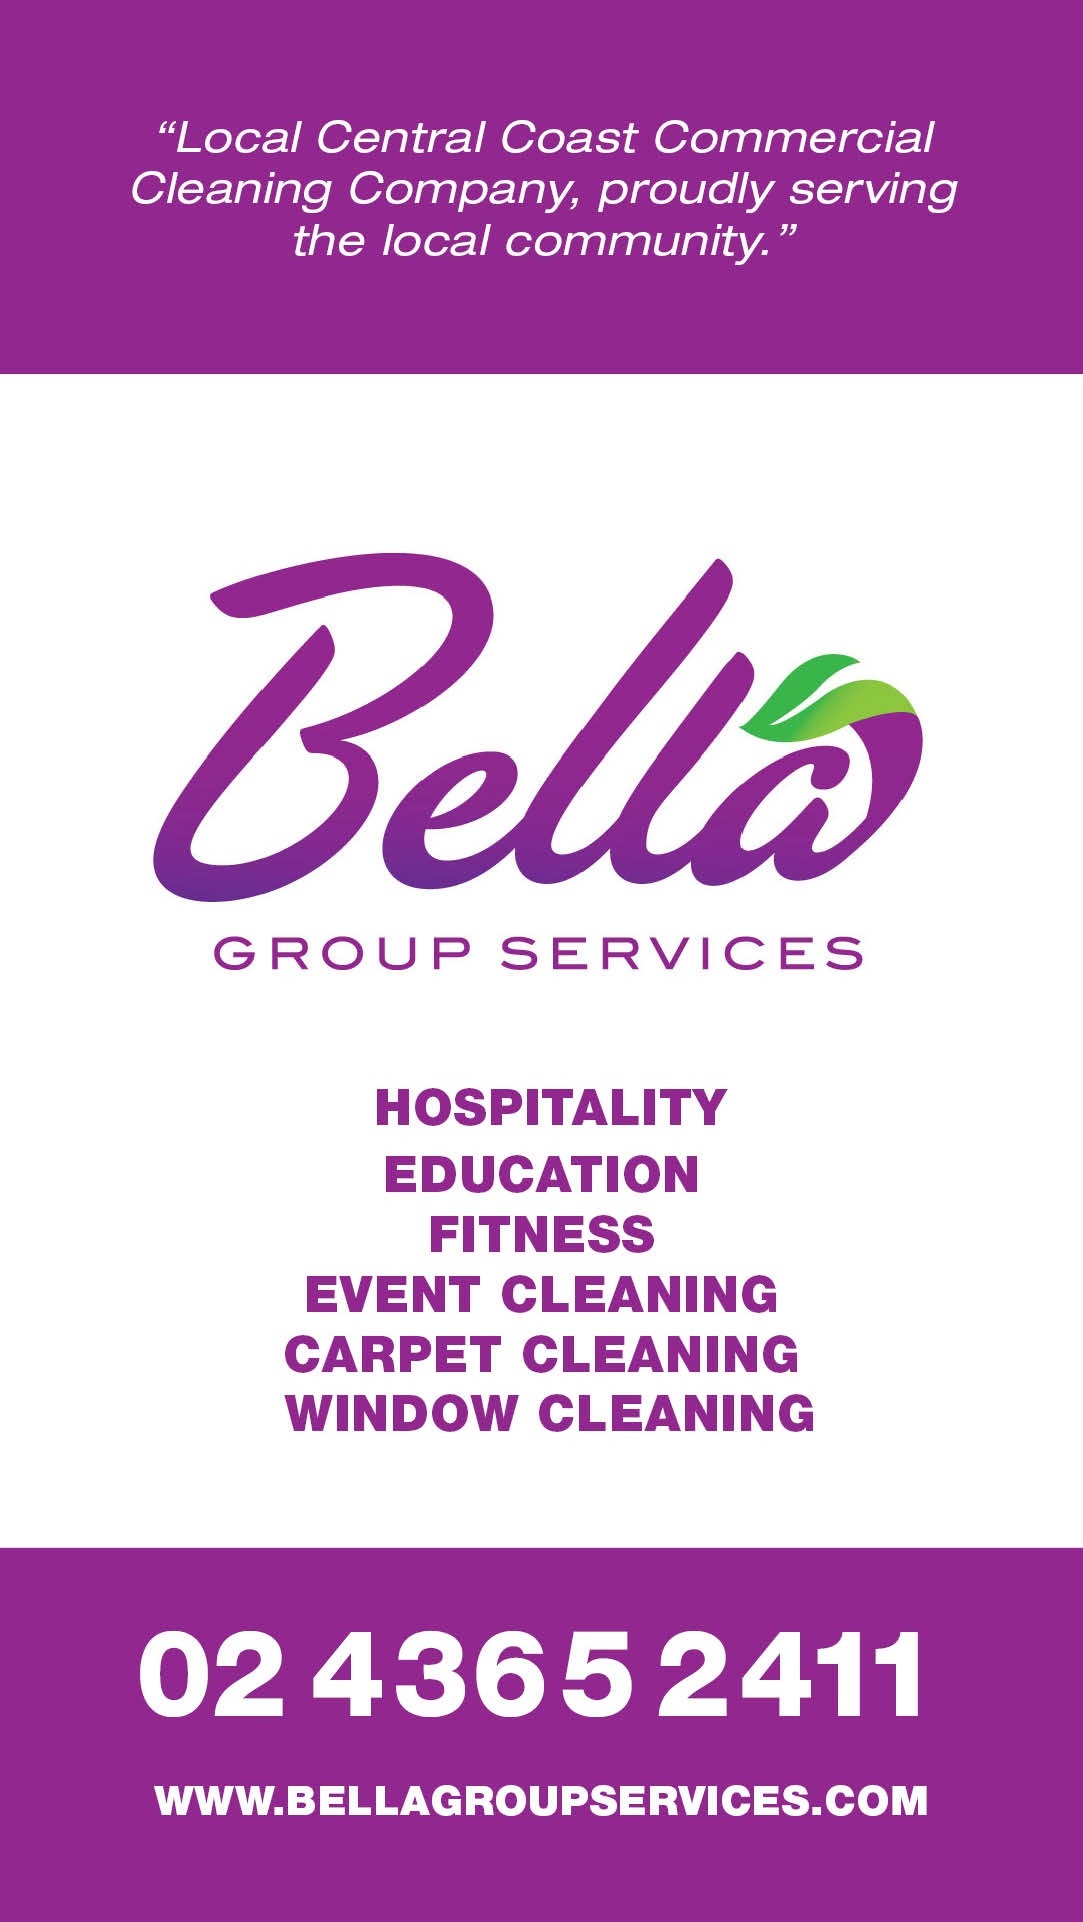 25. Bella Group Services